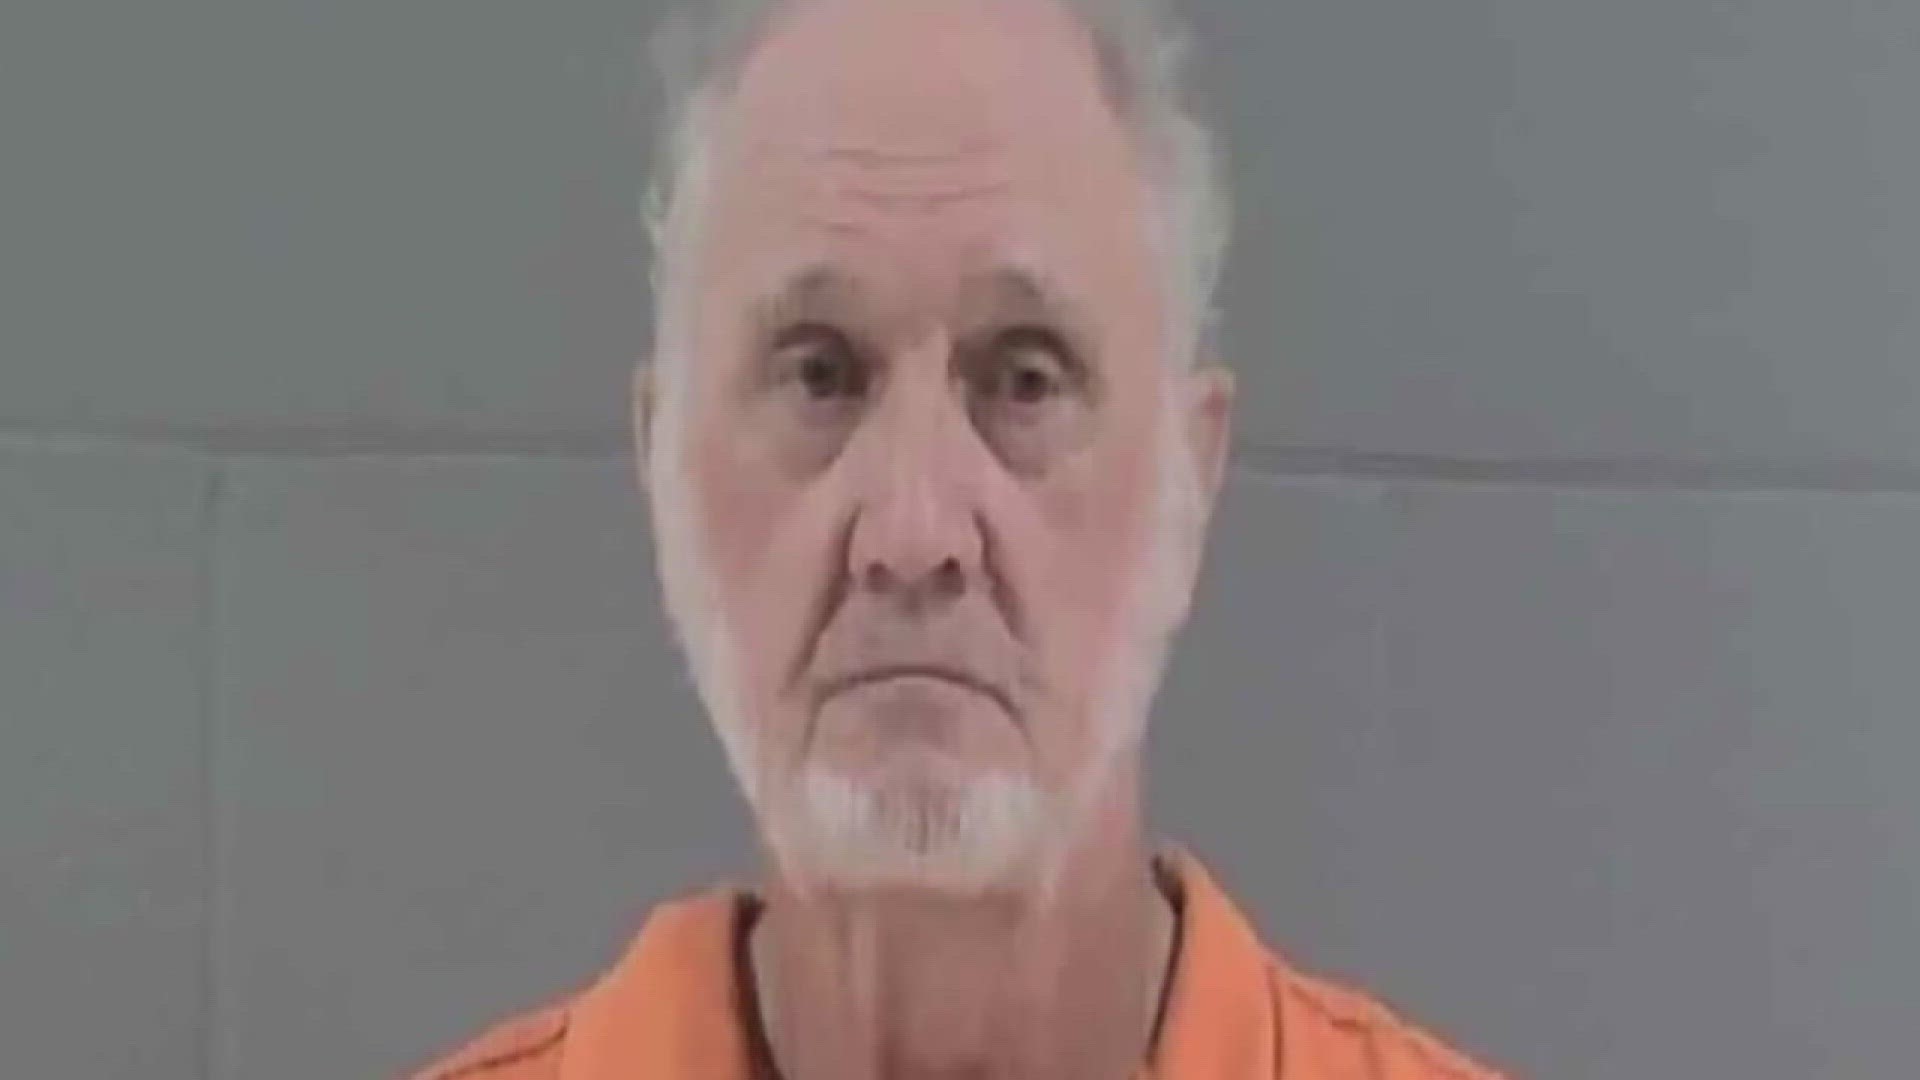 On Friday a Livingston Parish jury found John Mack guilty of first-degree rape and attempted first-degree rape.